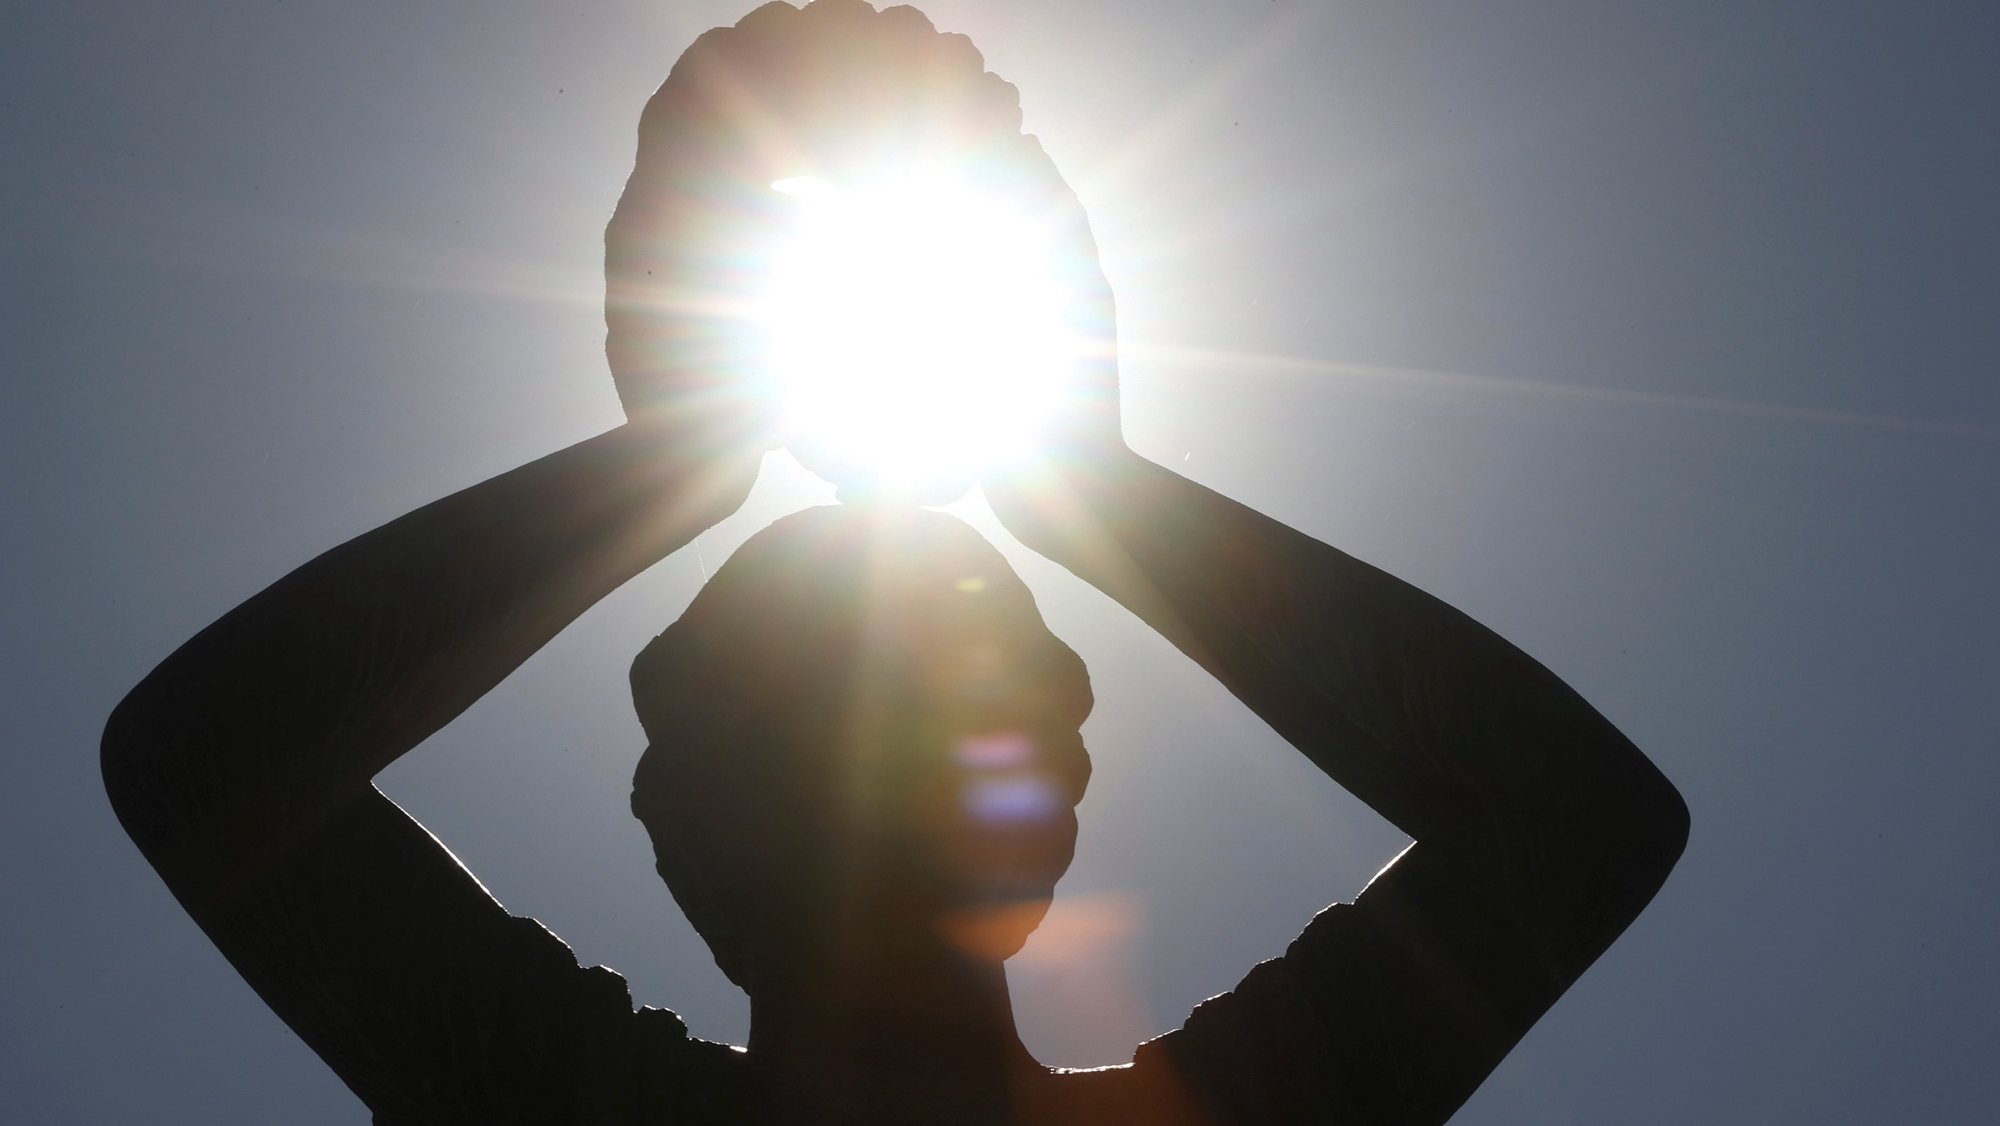 epa08578479 The sun is seen between the hands of a sculpture at Retiro Park in Madrid, Spain, 01 August 2020, during the heat wave that brought temperatures of over 40 degrees Celsius.  EPA/Mariscal